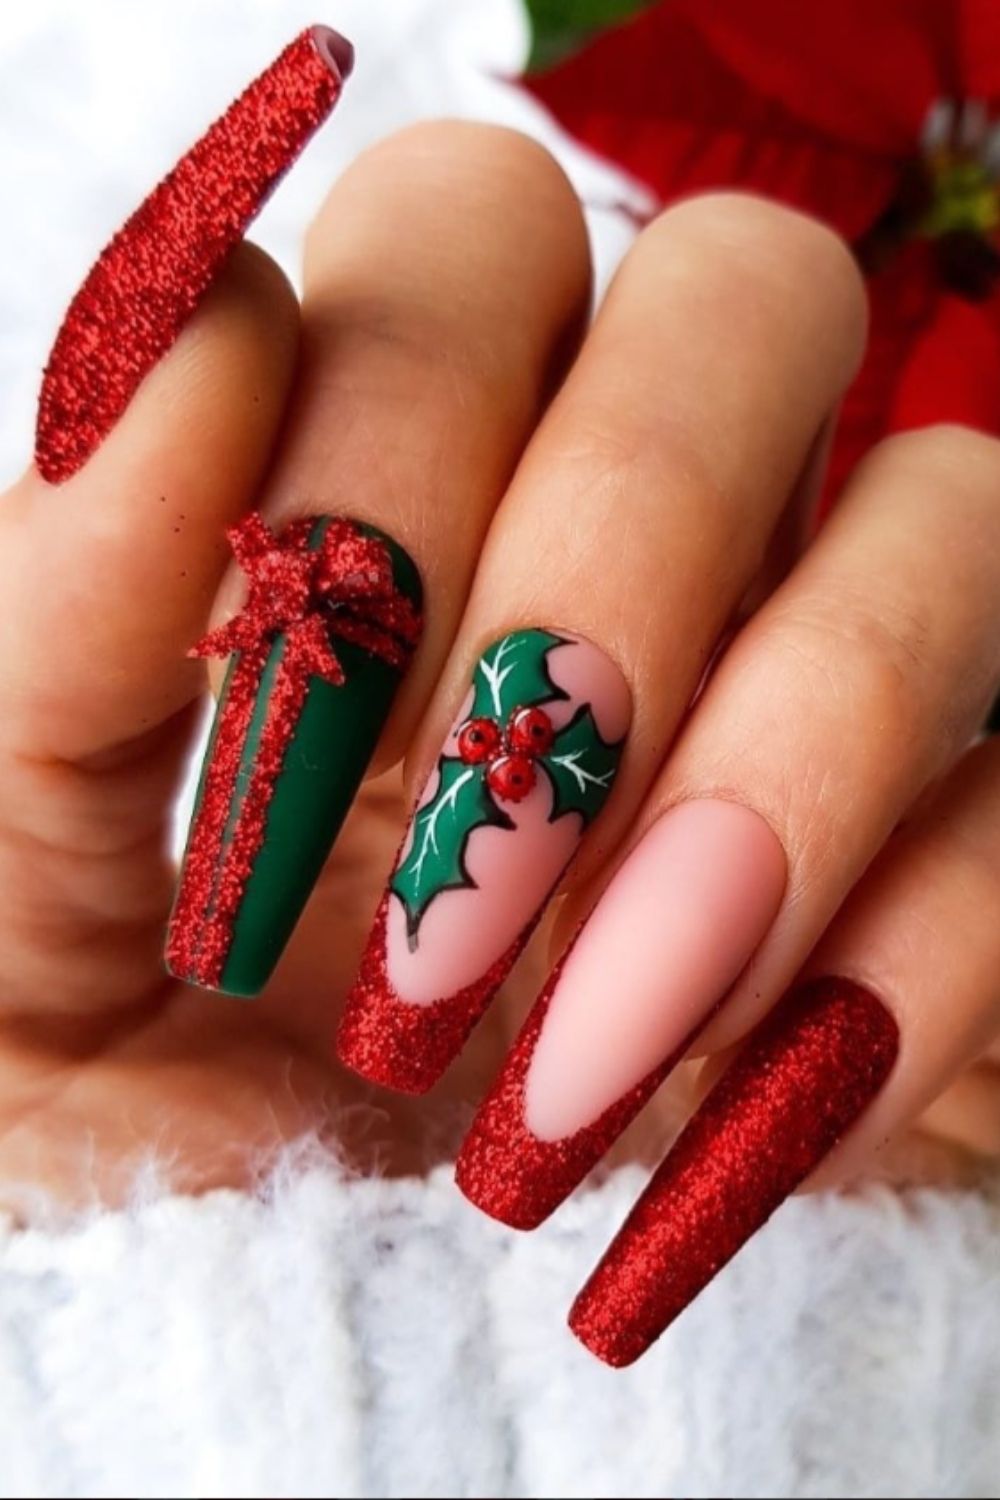 Red and green coffin nails designs